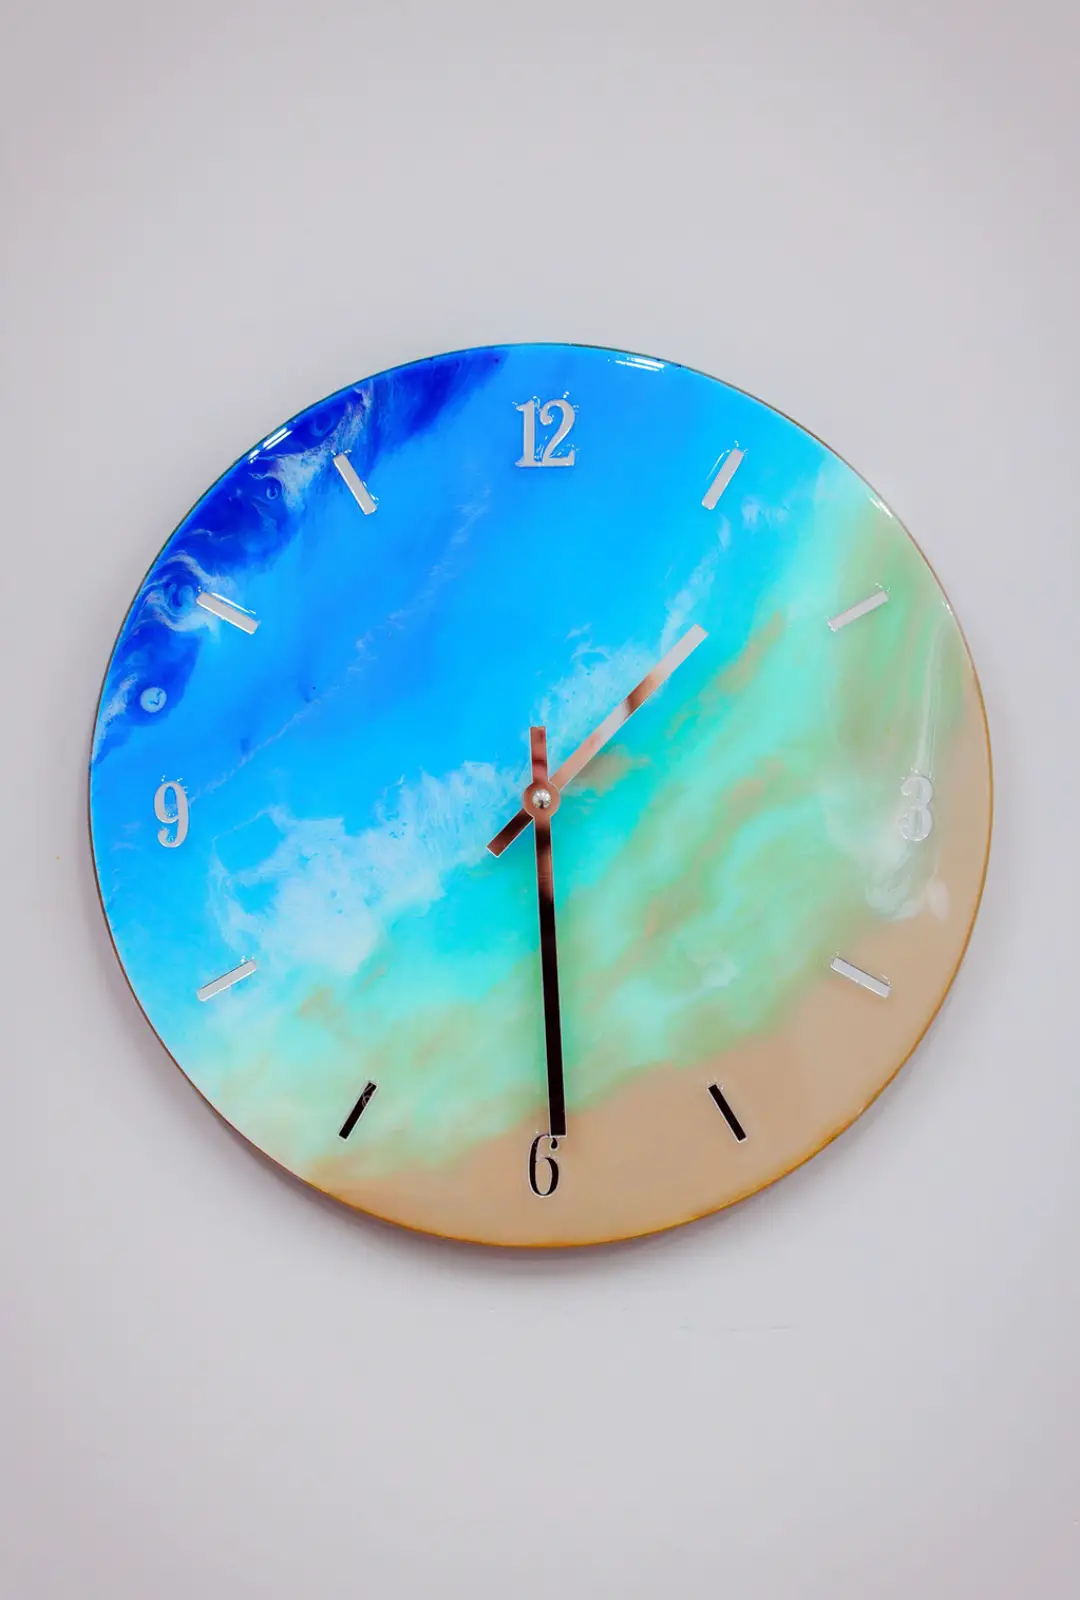 Bright blue resin clock that fades to sand color